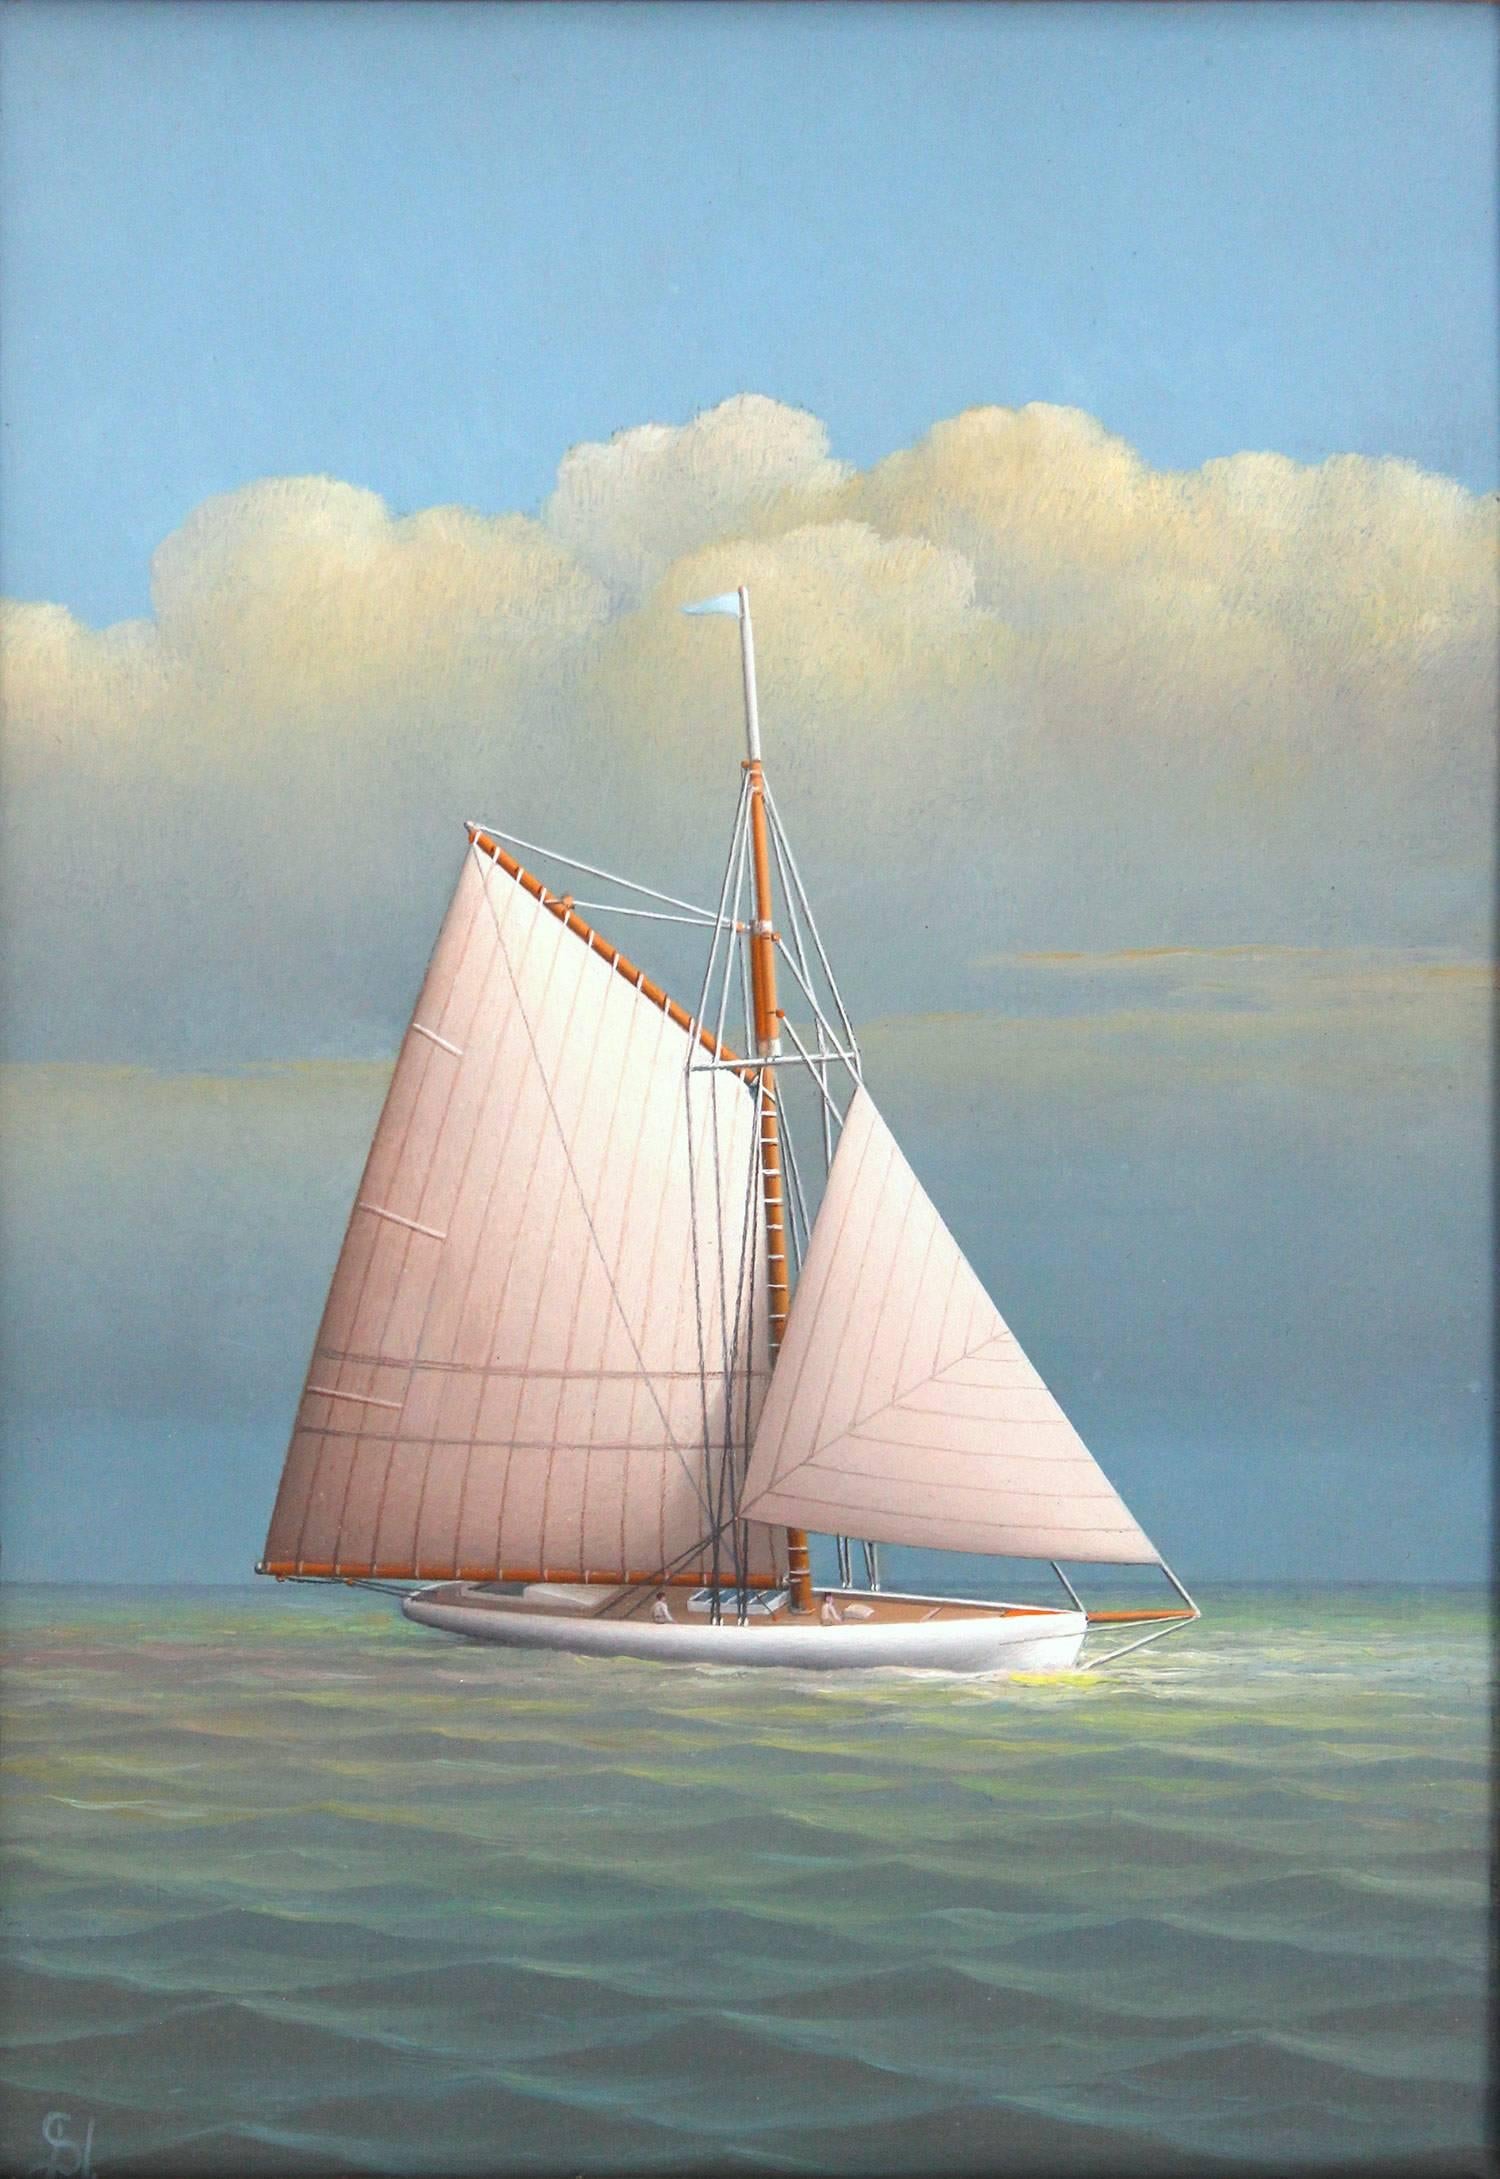 Sailing on the Pacific - Painting by George Nemethy